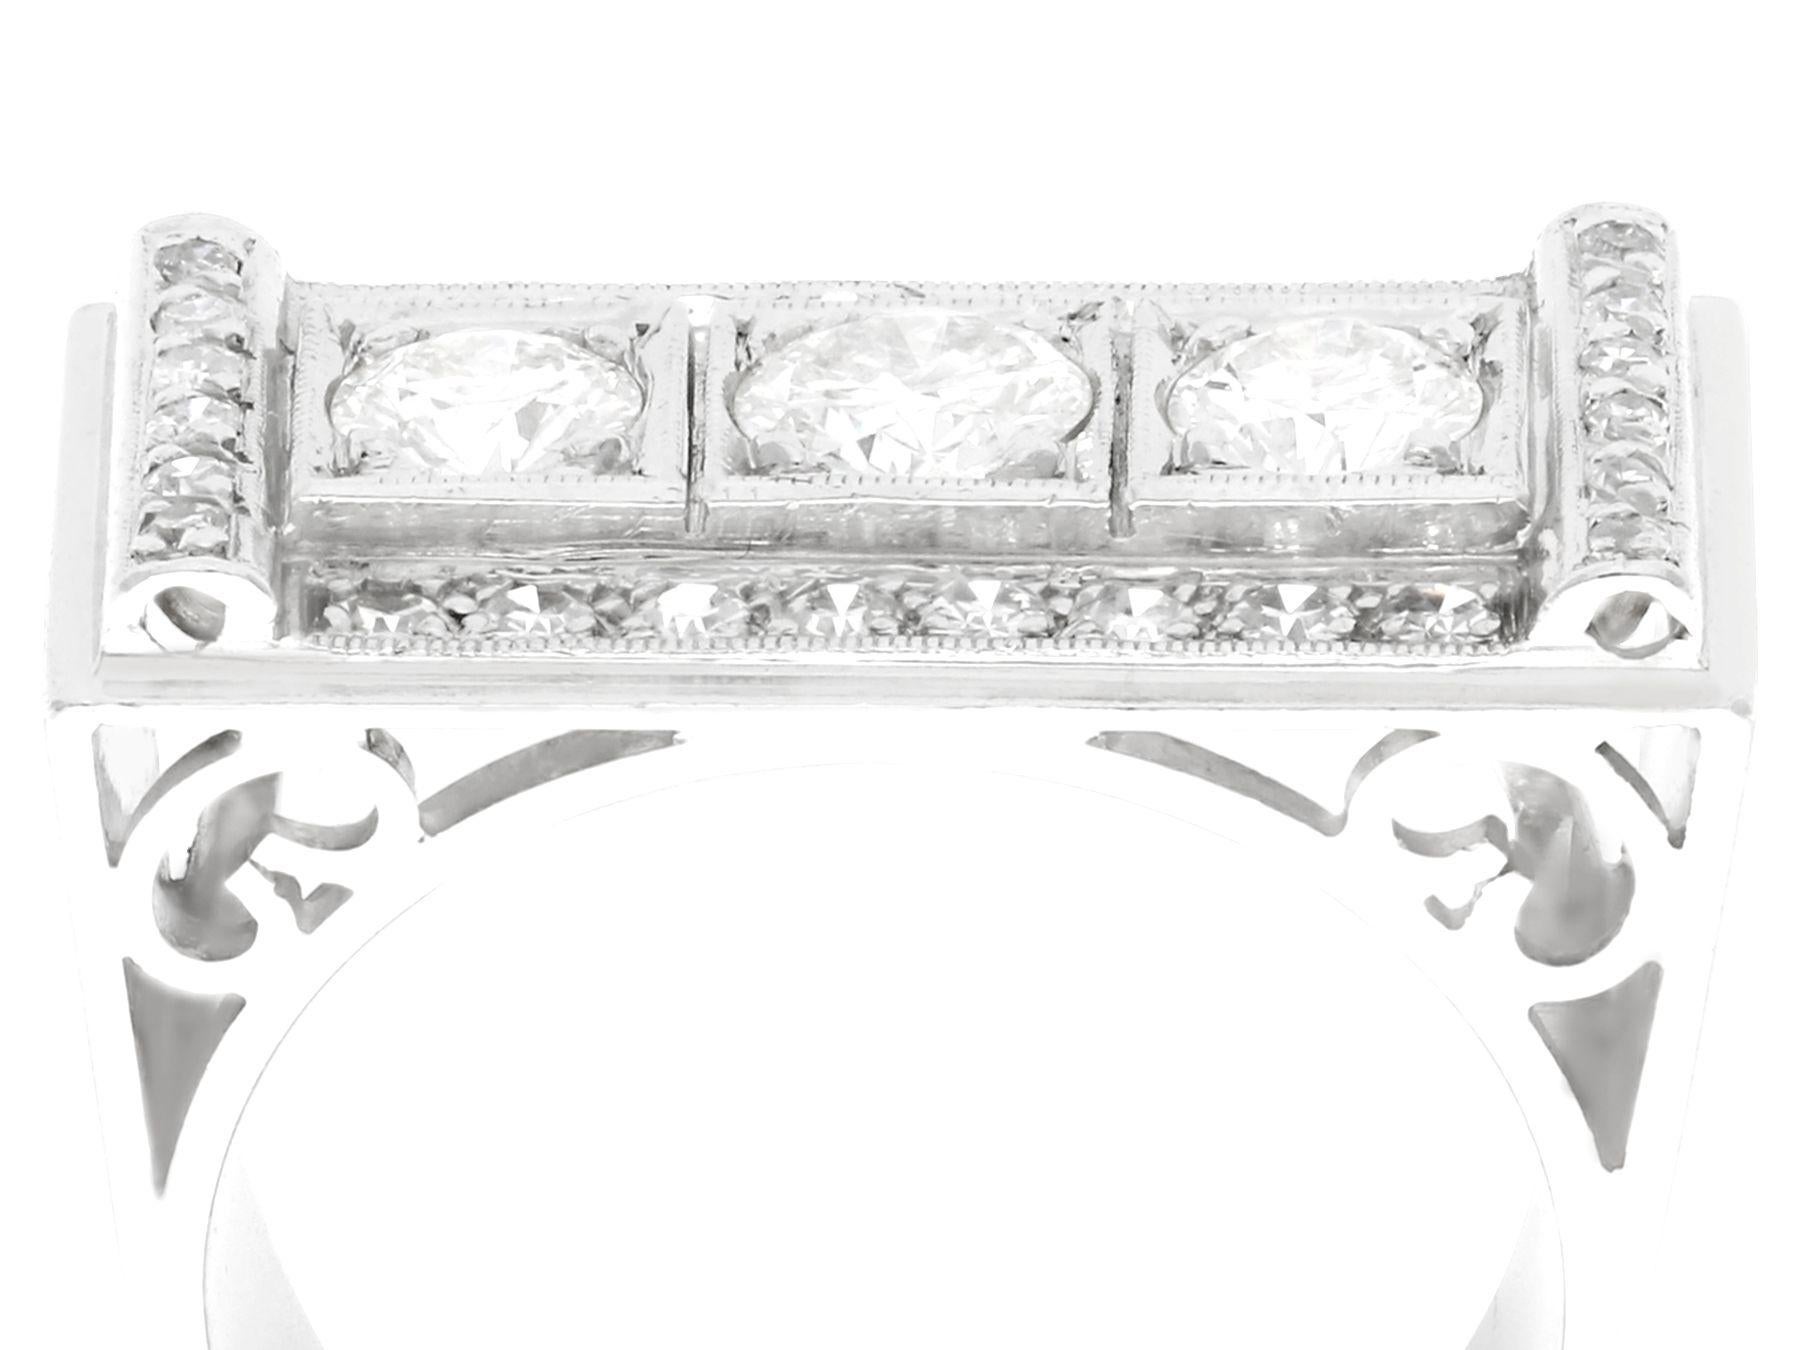 A stunning vintage Art Deco style 1.89 carat diamond and platinum cocktail ring; part of our diverse vintage jewelry and estate jewelry collections.

This stunning, fine and impressive rectangular diamond ring has been crafted in platinum.

The